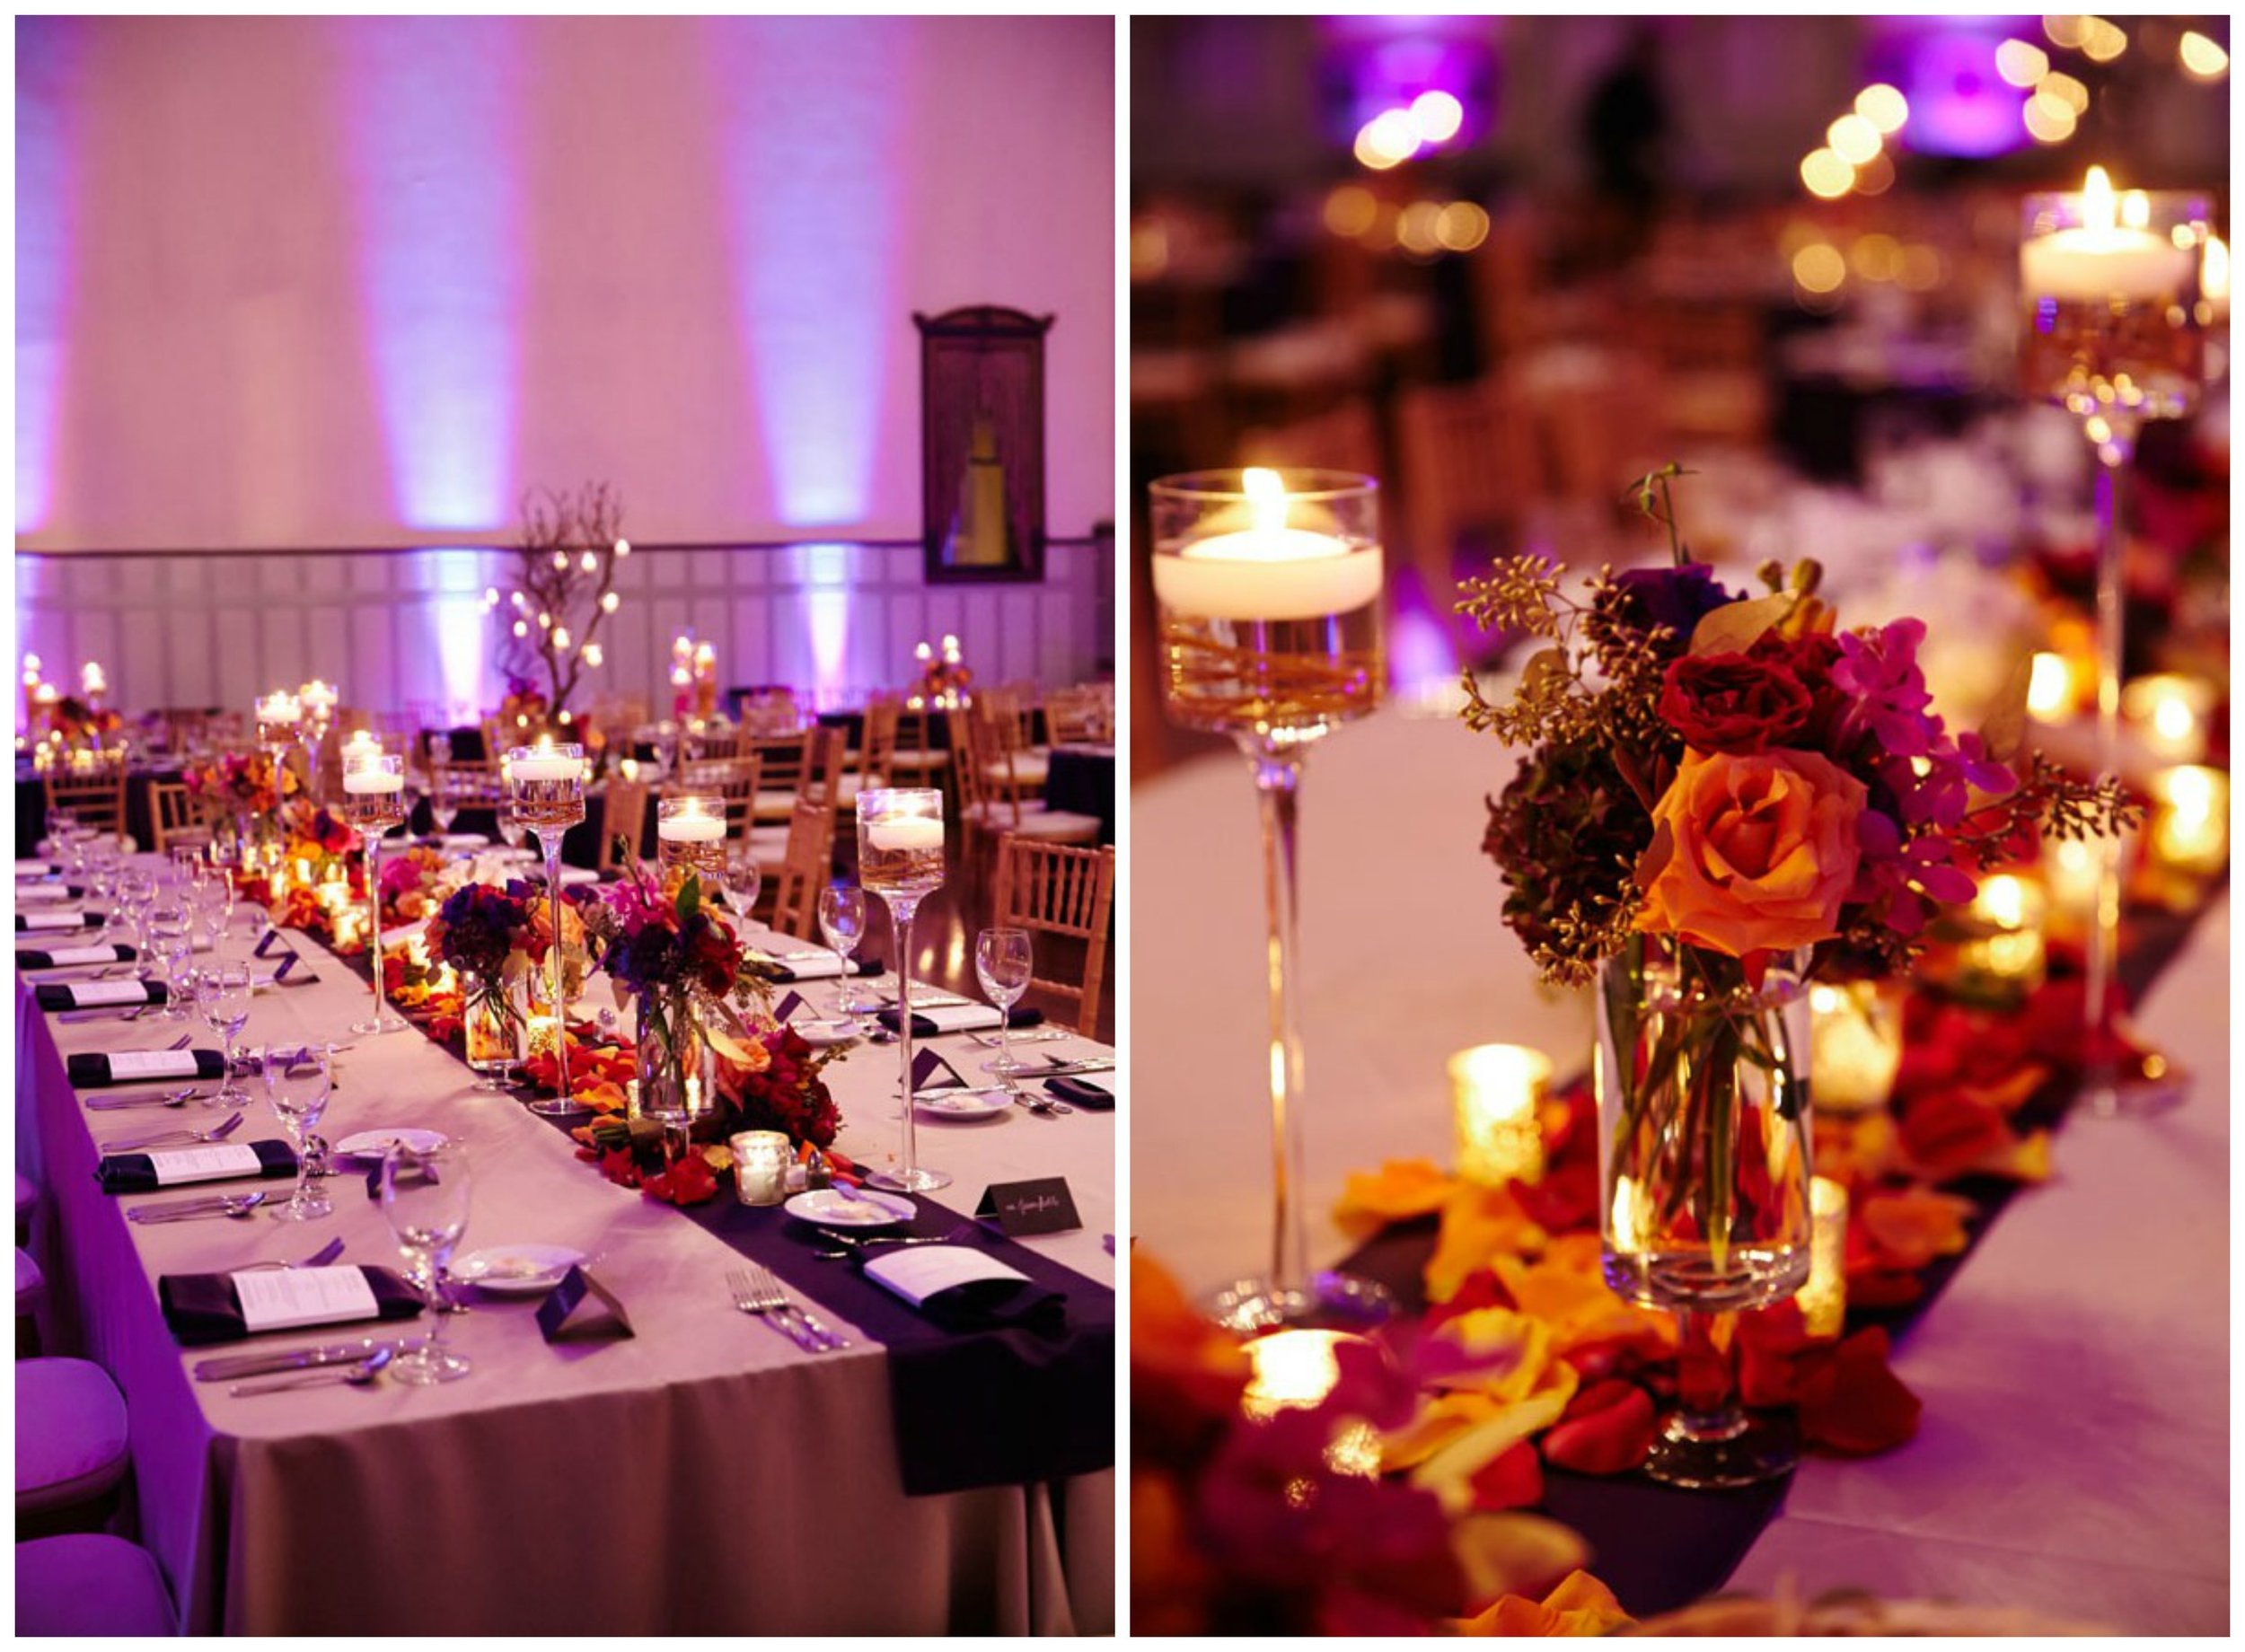 30.-Germania-Place-Wedding.-Dennis-Lee-Photography.-Sweetchic-Events.Vale-of-Enna.-Head-Table-Arrangement.-Accents-of-orange-purple-and-fushia..jpg